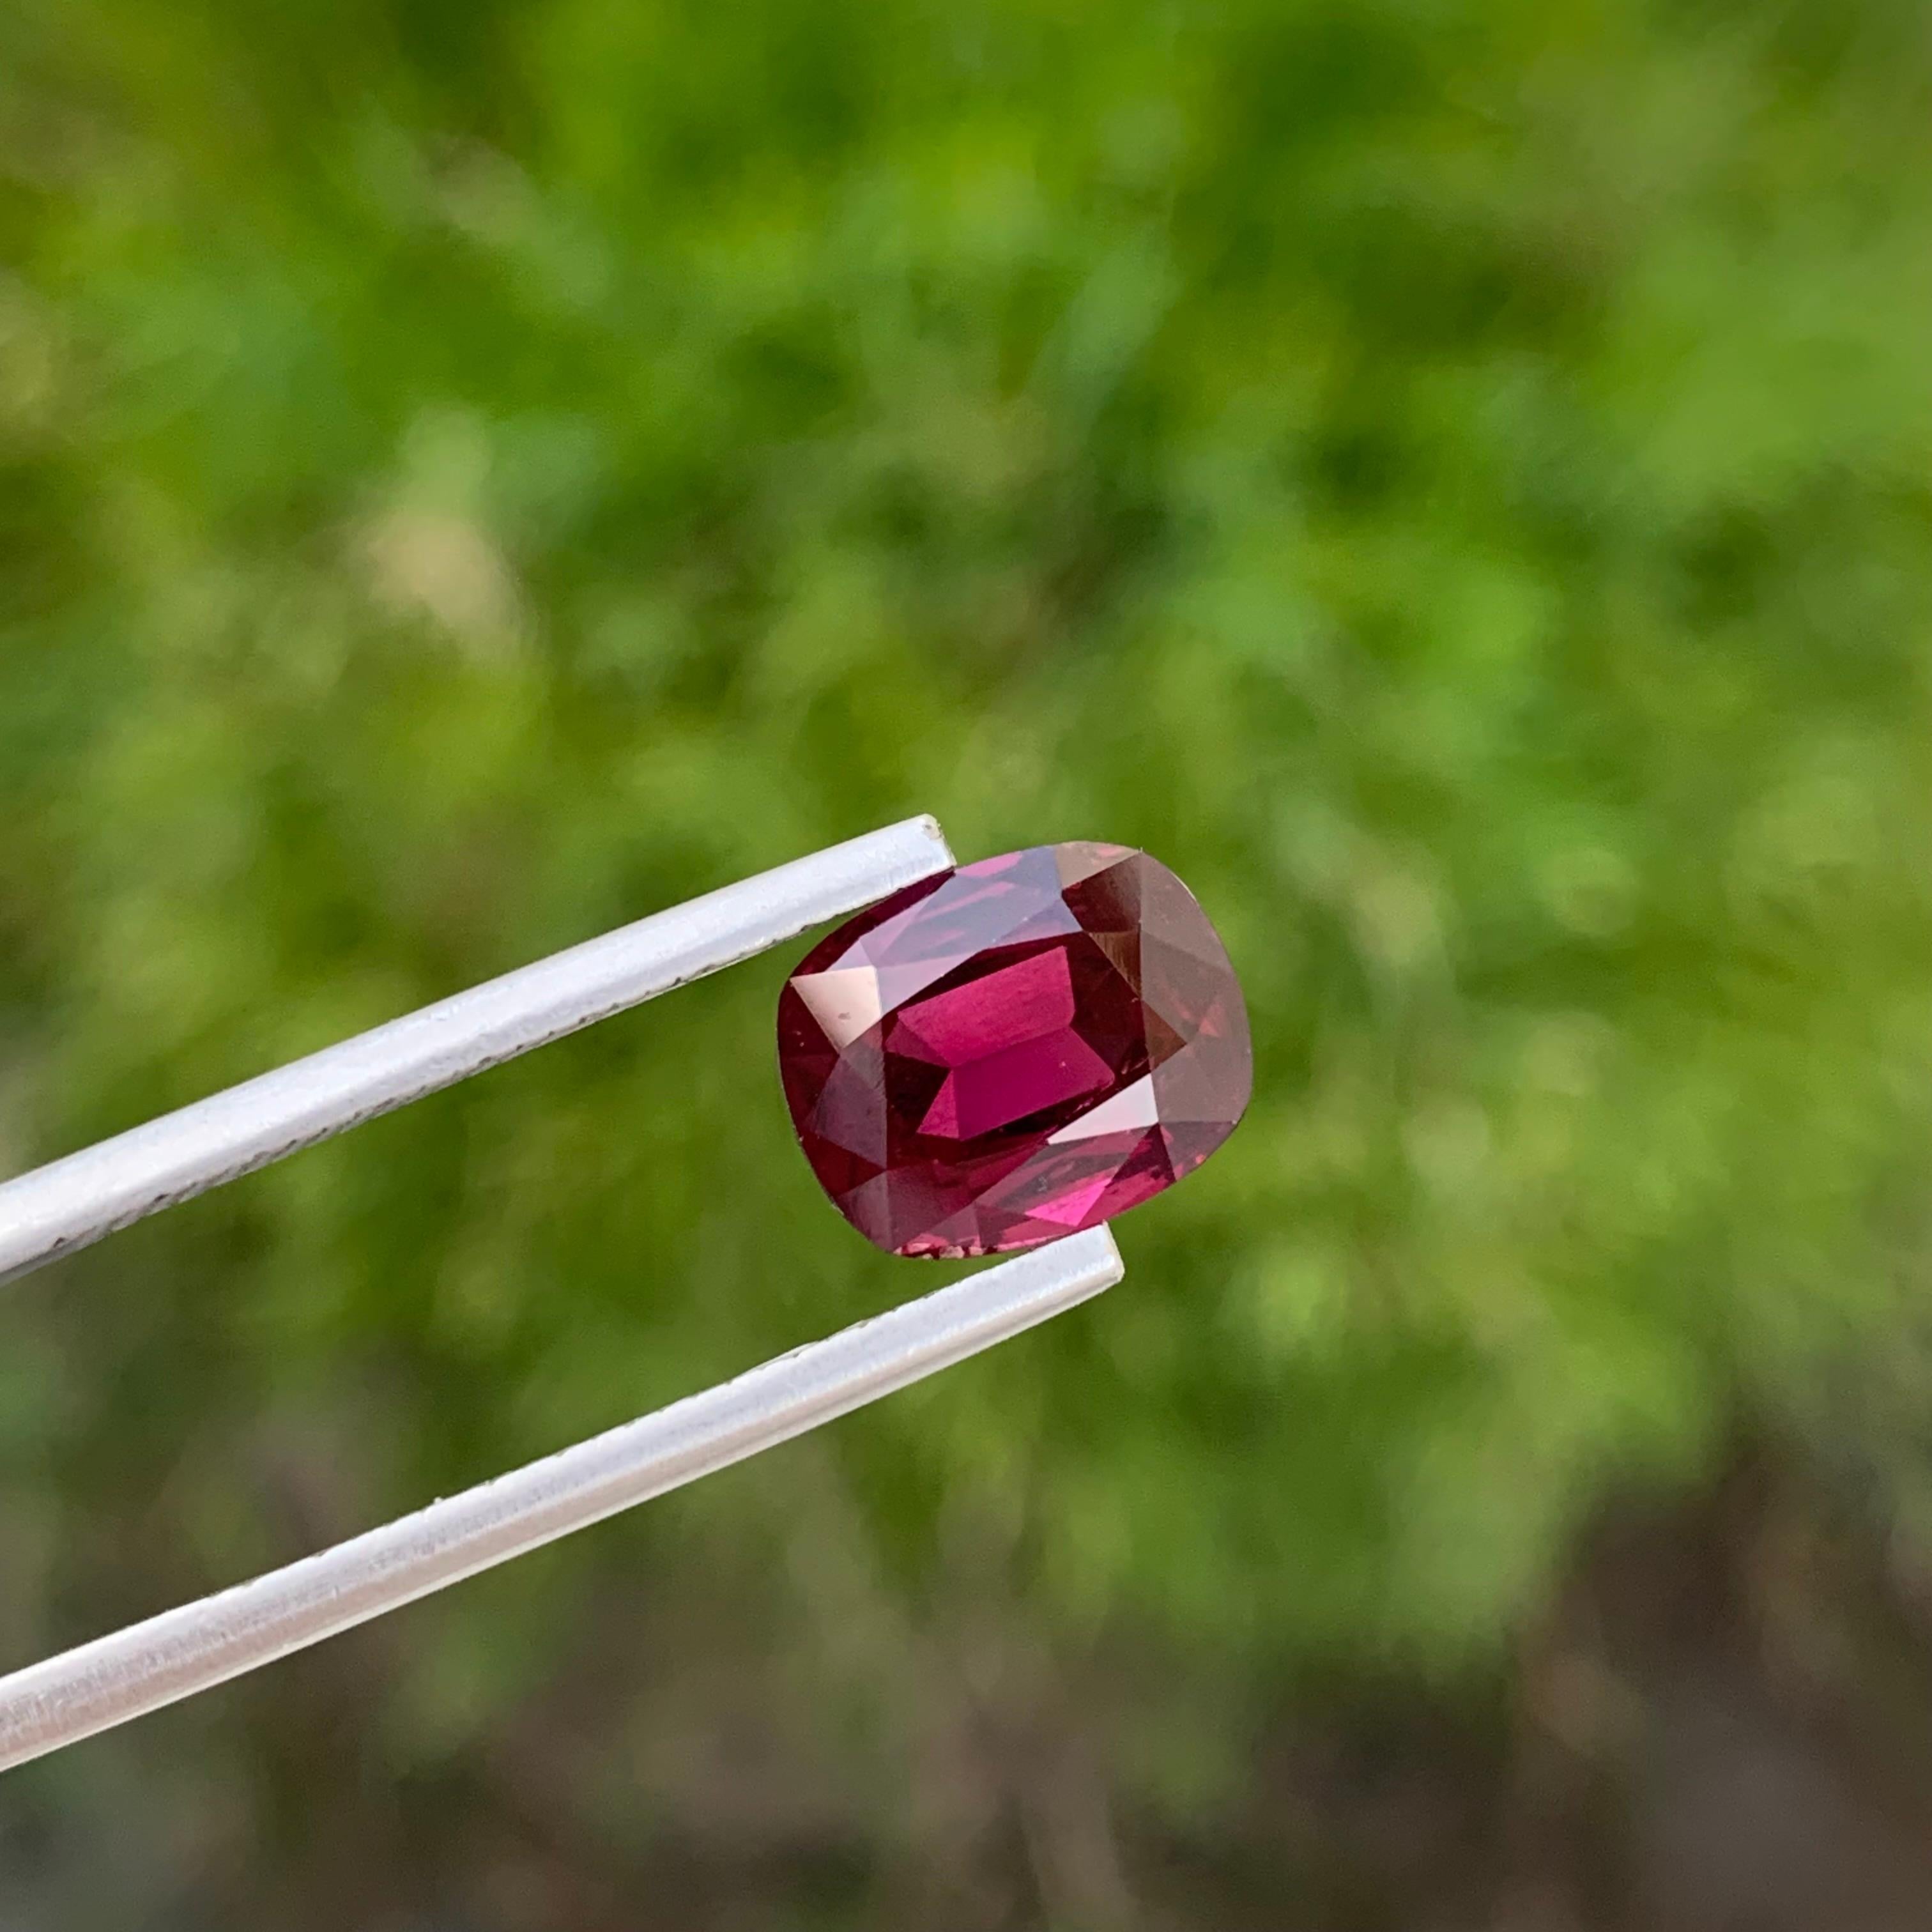 Loose Rhodolite Garnet
Weight: 2.20 Carats
Dimension: 10.1 x 8.2 x 5.6 Mm
Colour: Red
Origin: Africa
Treatment: Non
Shape : Cushion

Rhodolite garnet, a gemstone celebrated for its enchanting reddish-purple hues, occupies a special place in the